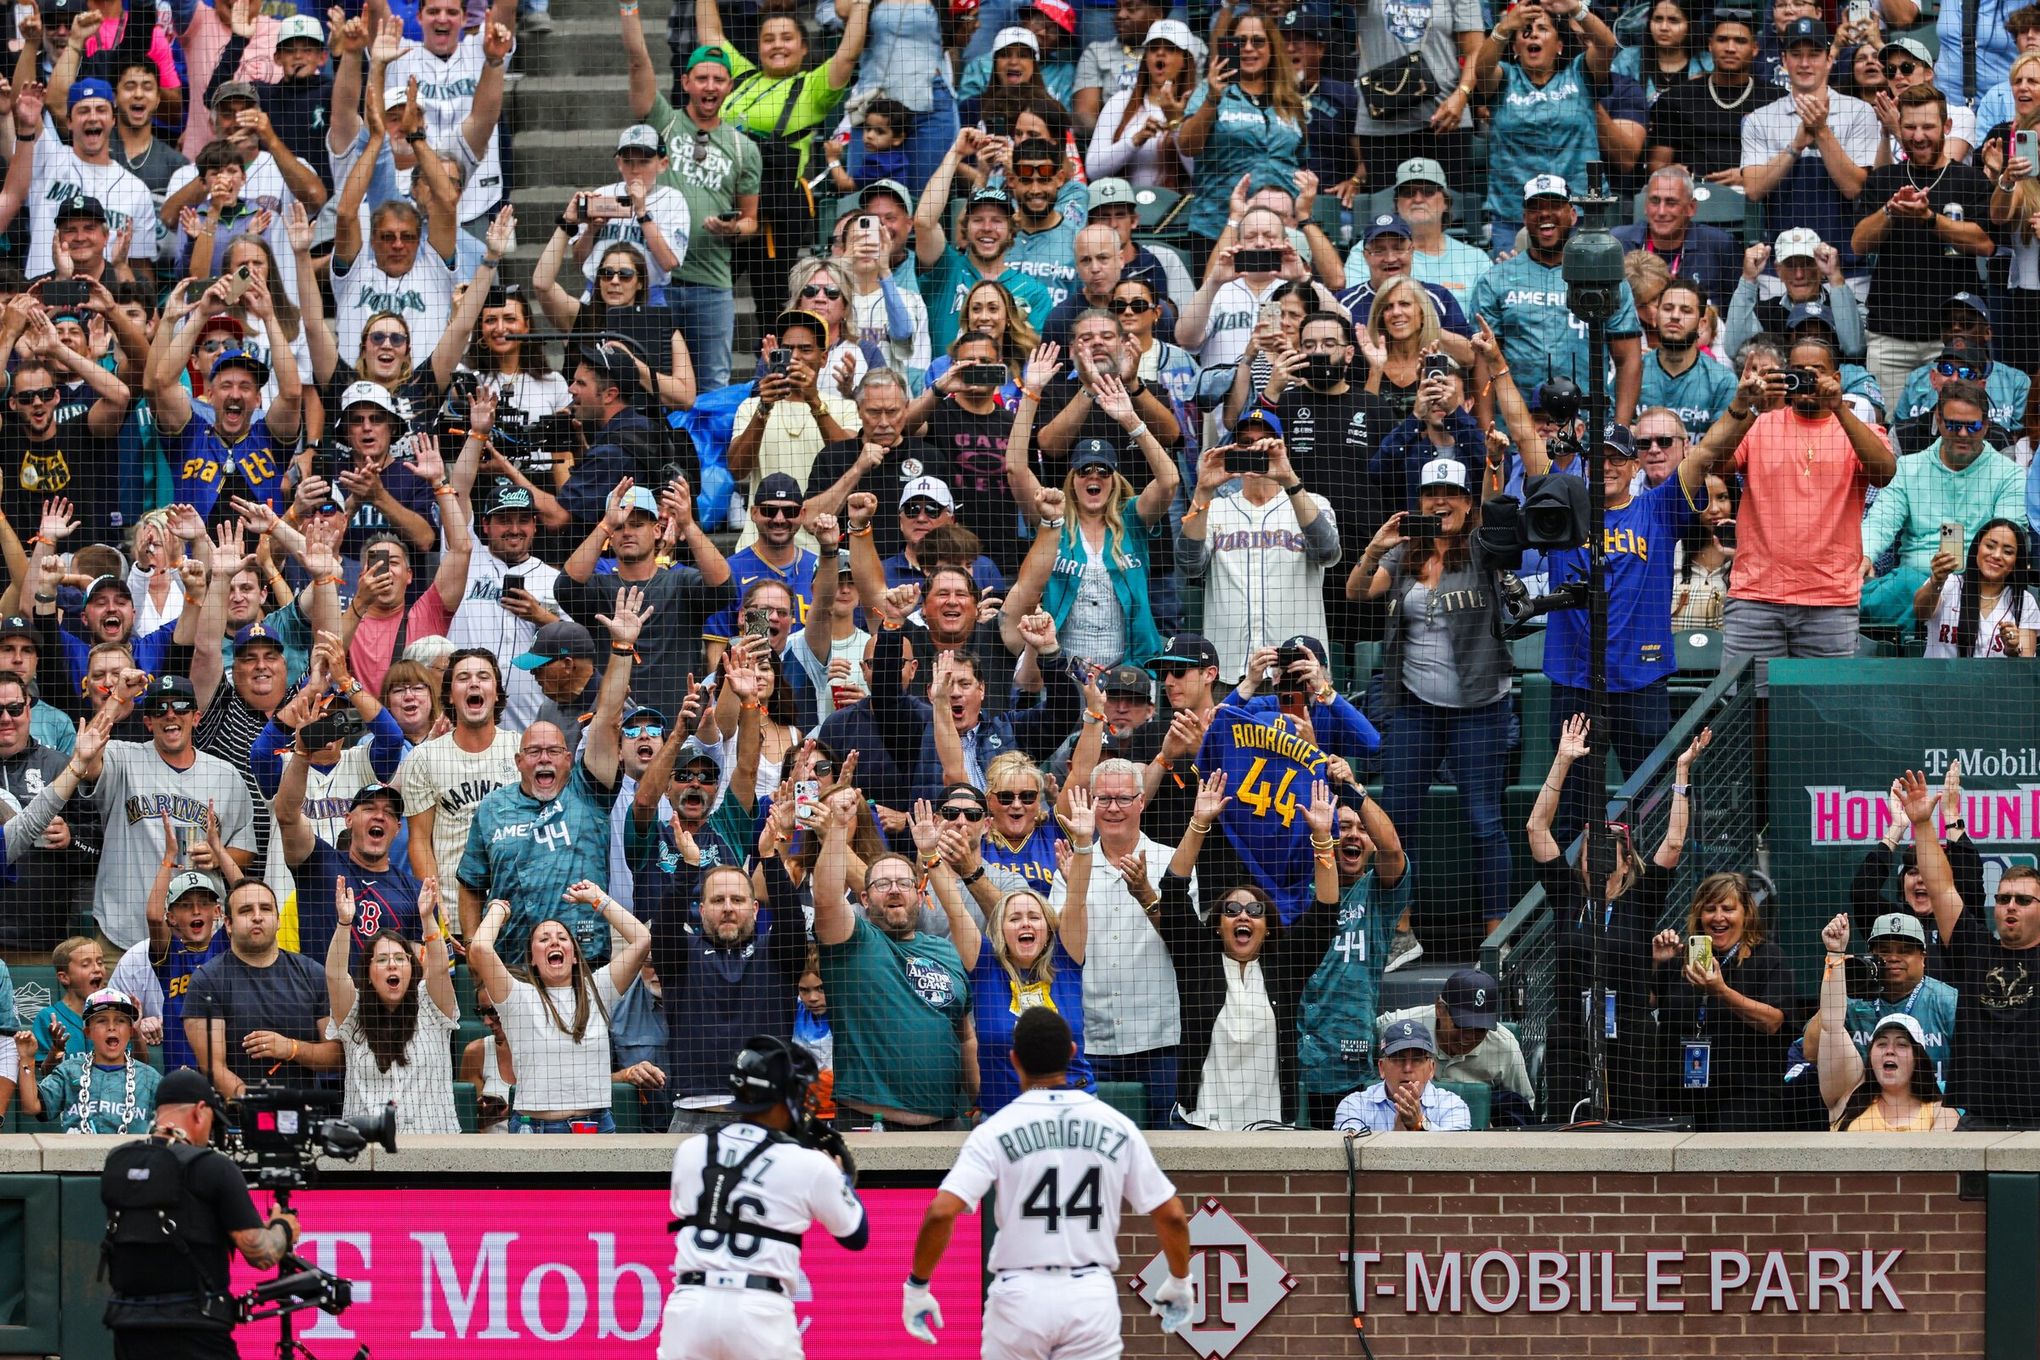 Julio Rodriguez's inside-the-park homer was years in the making for Mariners